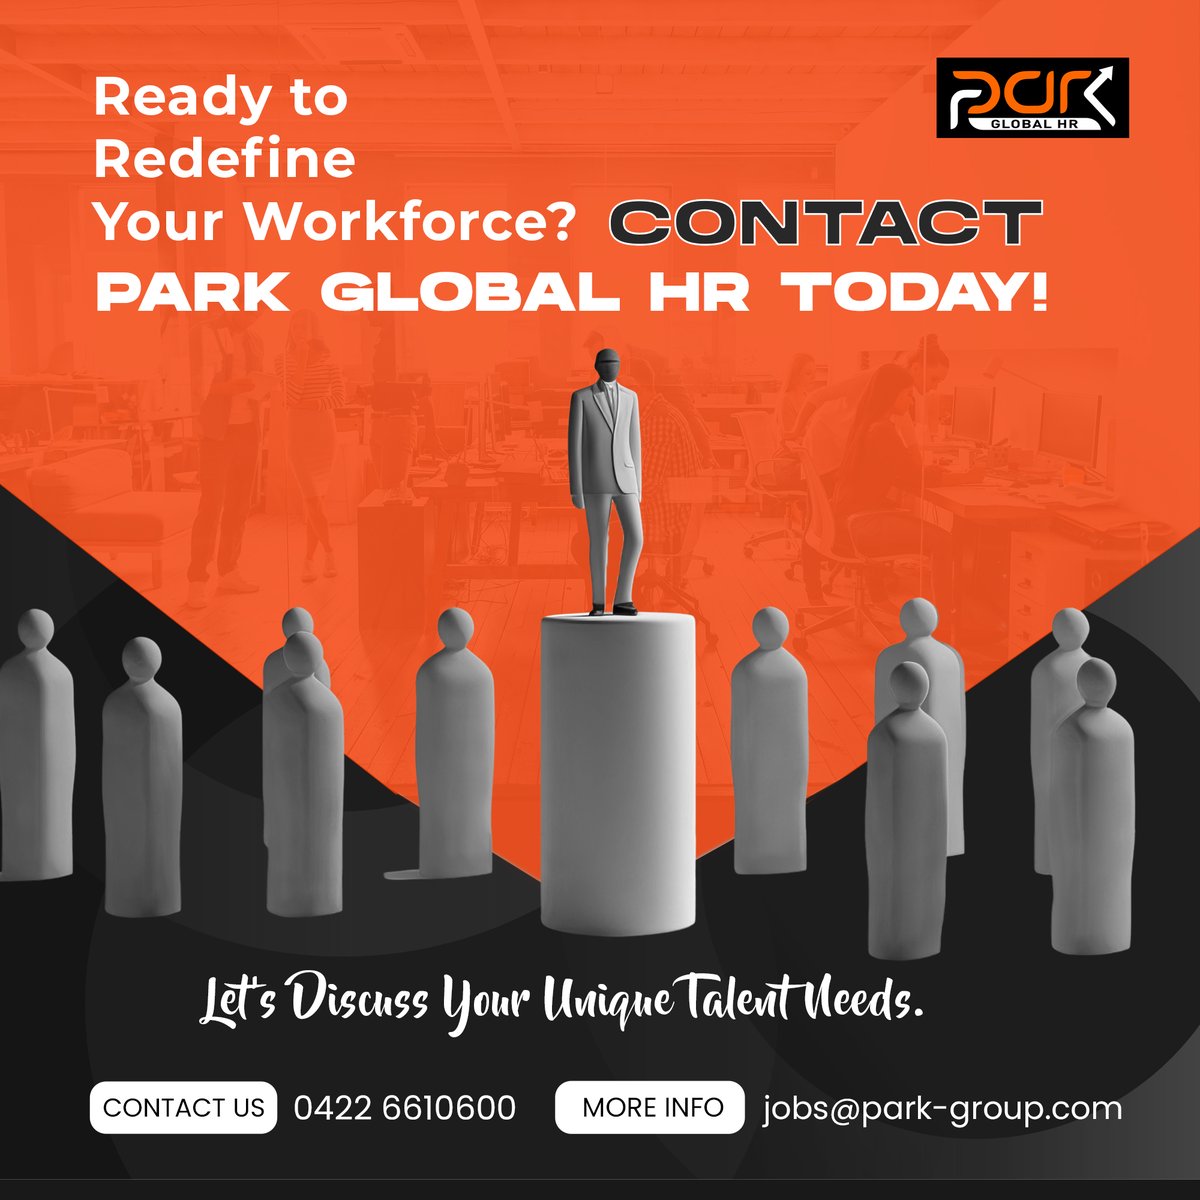 Elevate Your Workforce with Park Global HR! Ready to redefine excellence? Let's discuss your unique talent needs and unlock a world of possibilities together. 

#ParkGlobalHR #TalentSolutions #RedefineExcellence #HRPartner